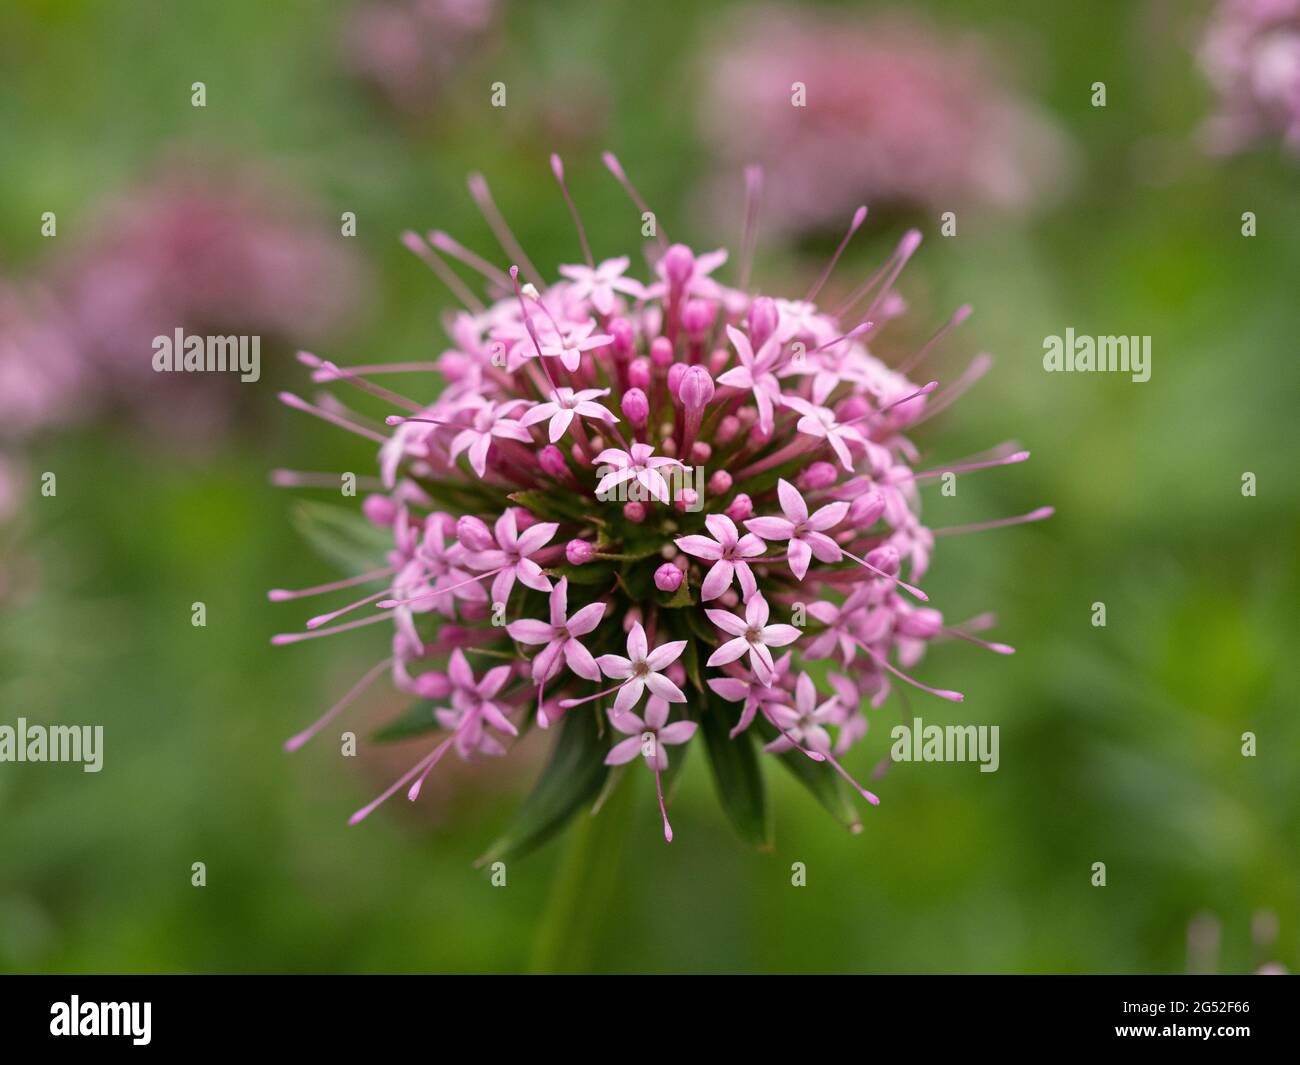 A close up of a single pink flowerhead of Phuopsis stylosa Stock Photo